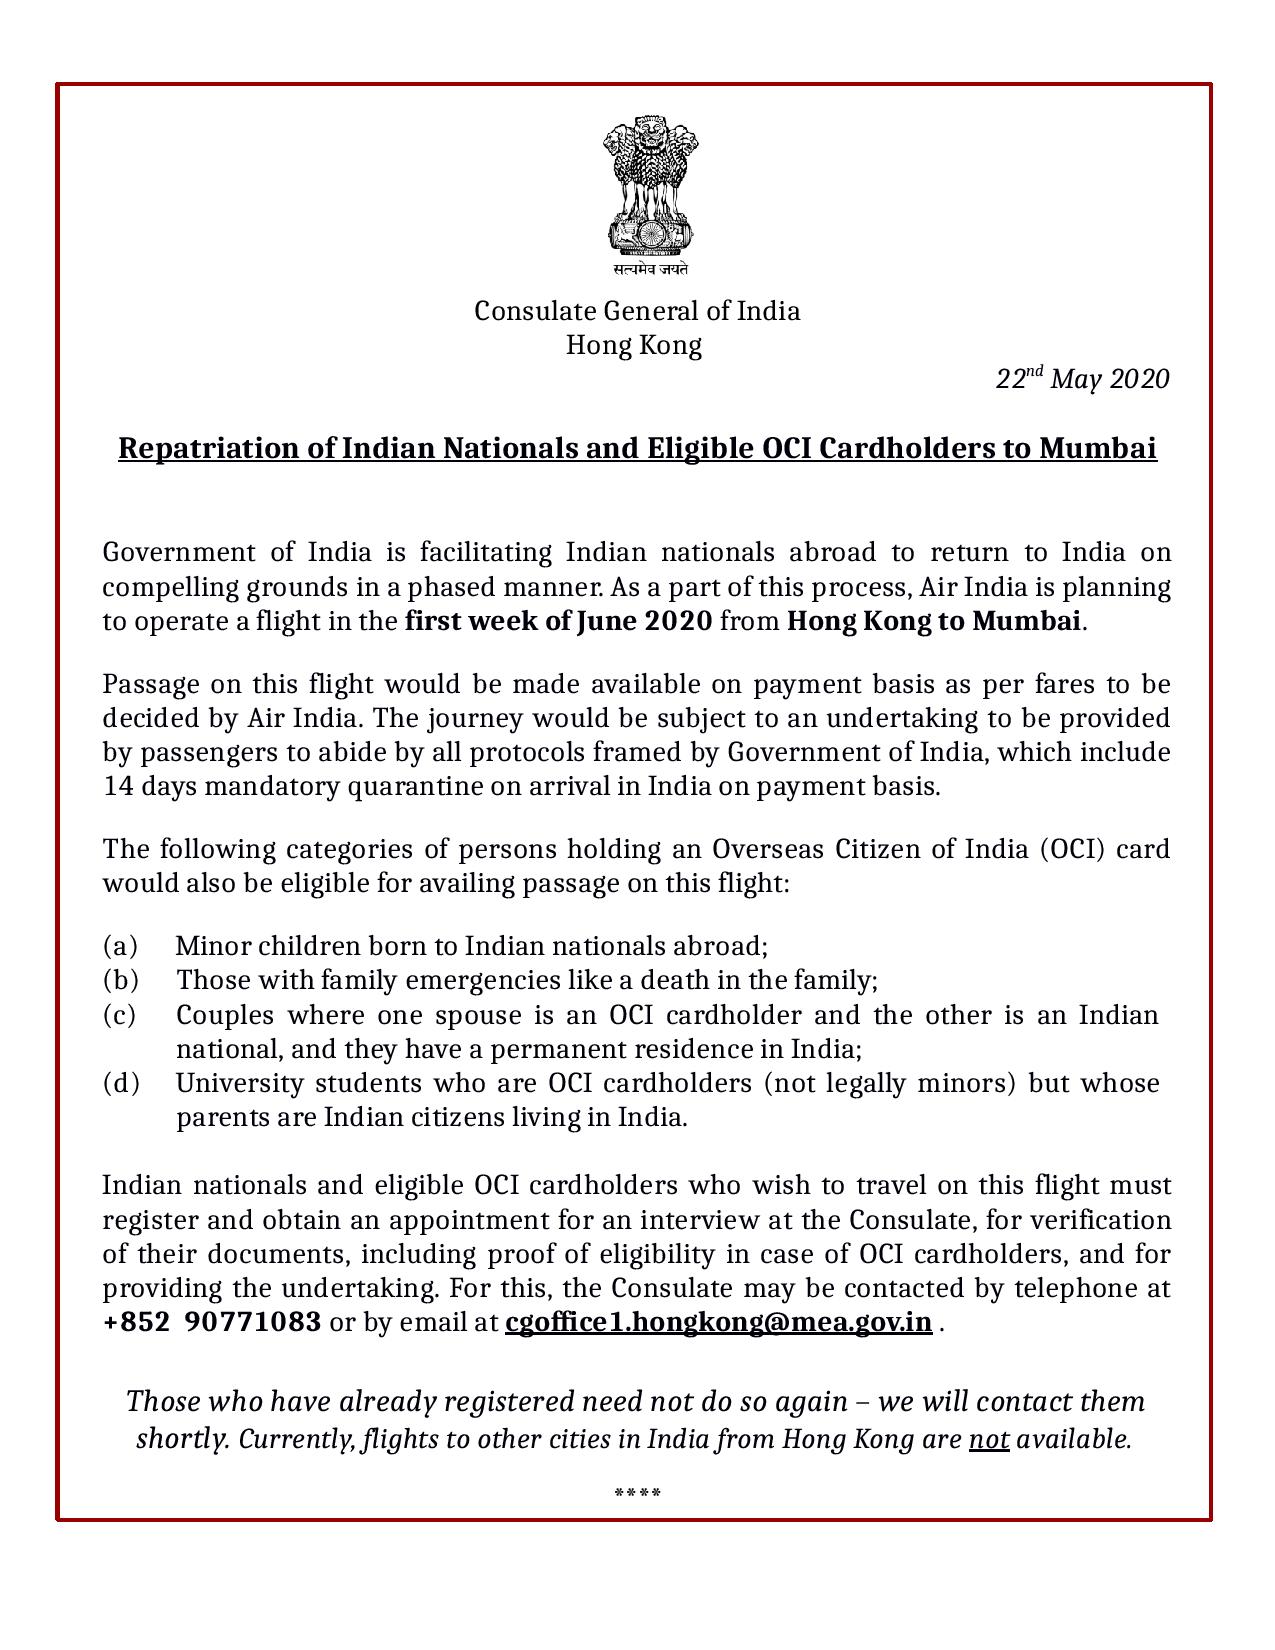 Repatriation of Indian Nationals and Eligible OCI Cardholders to Mumbai